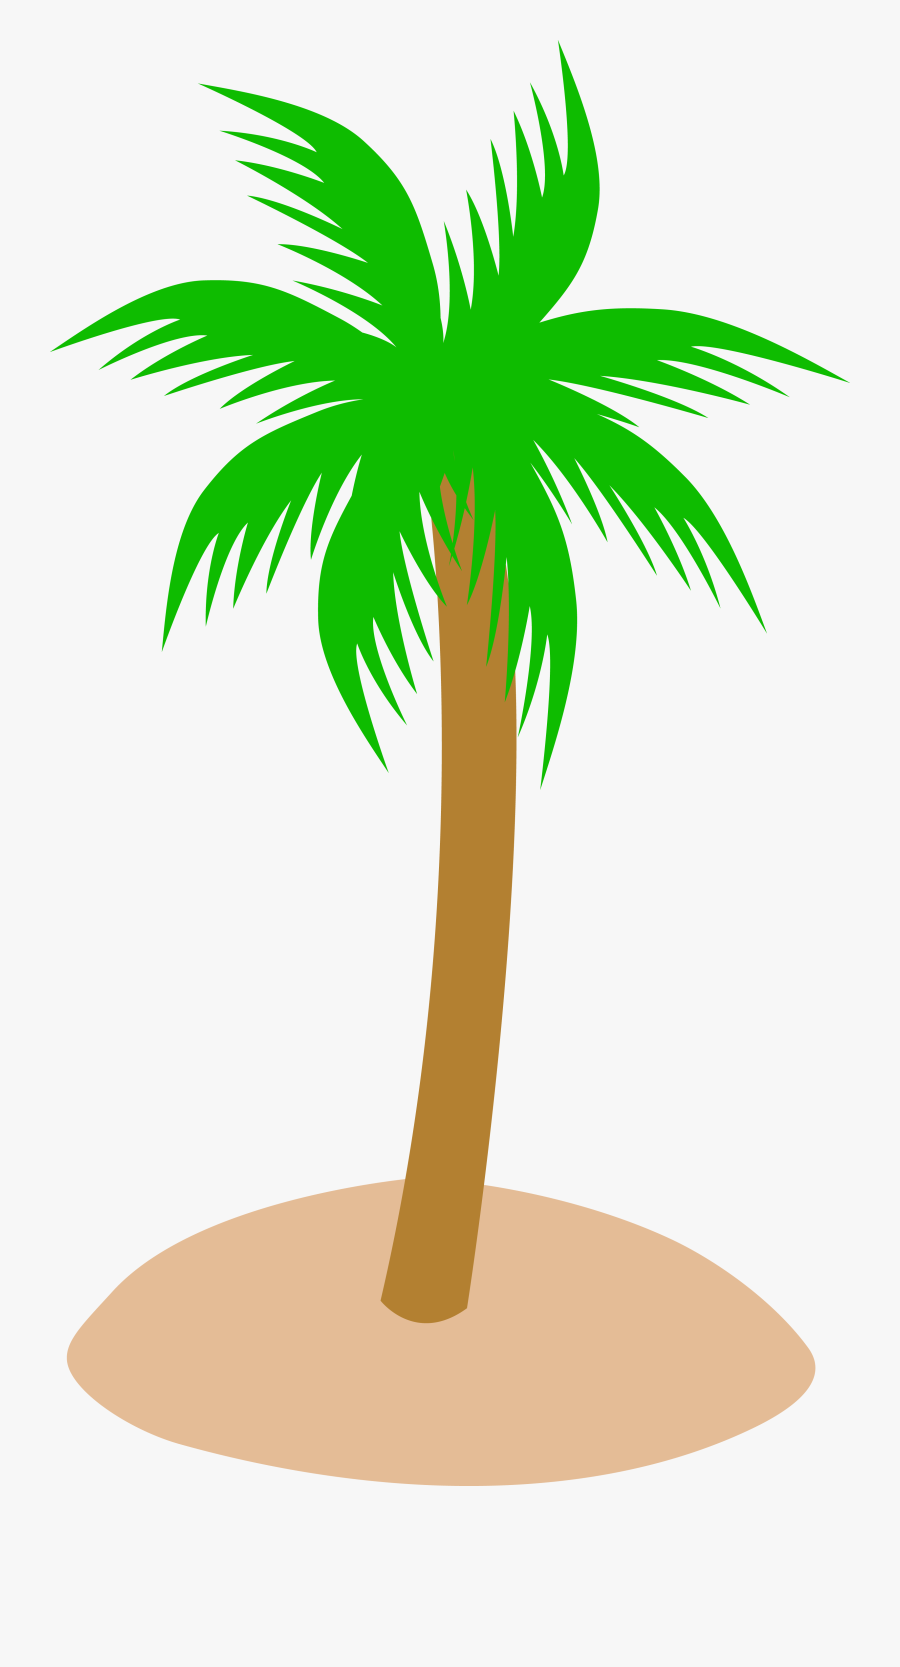 Beach Island Palm Tree With Coconuts Clipart - Cartoon Palm Tree Png, Transparent Clipart